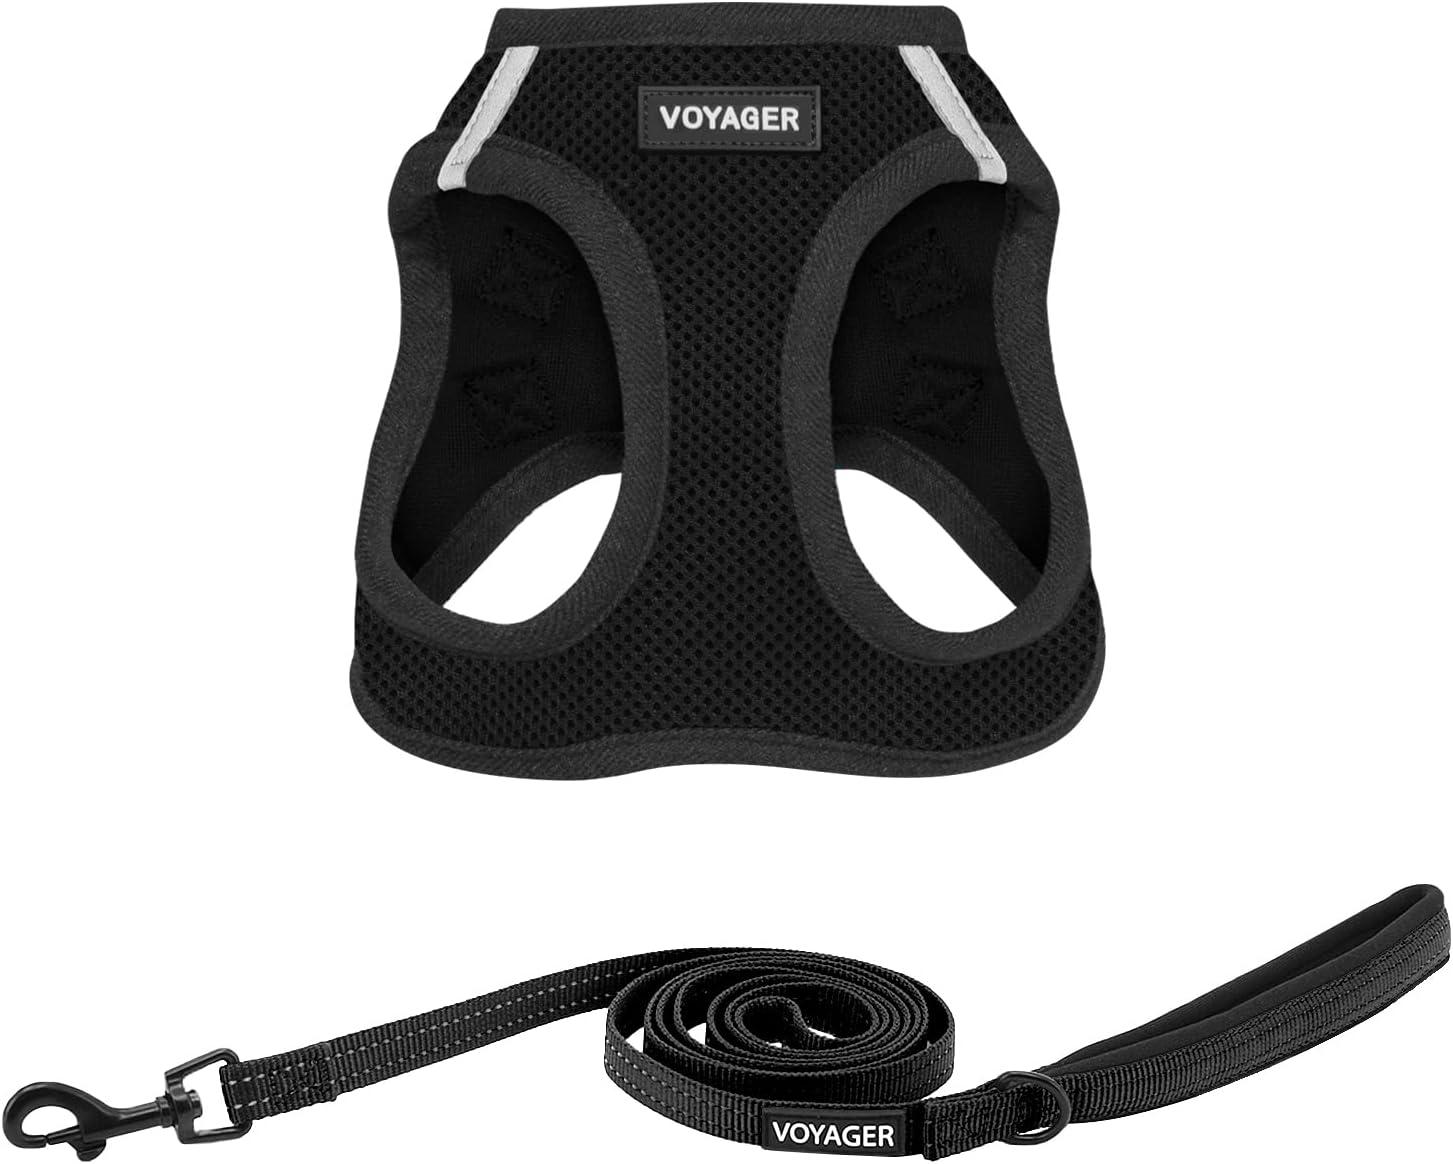 Voyager Step-In Air Harness